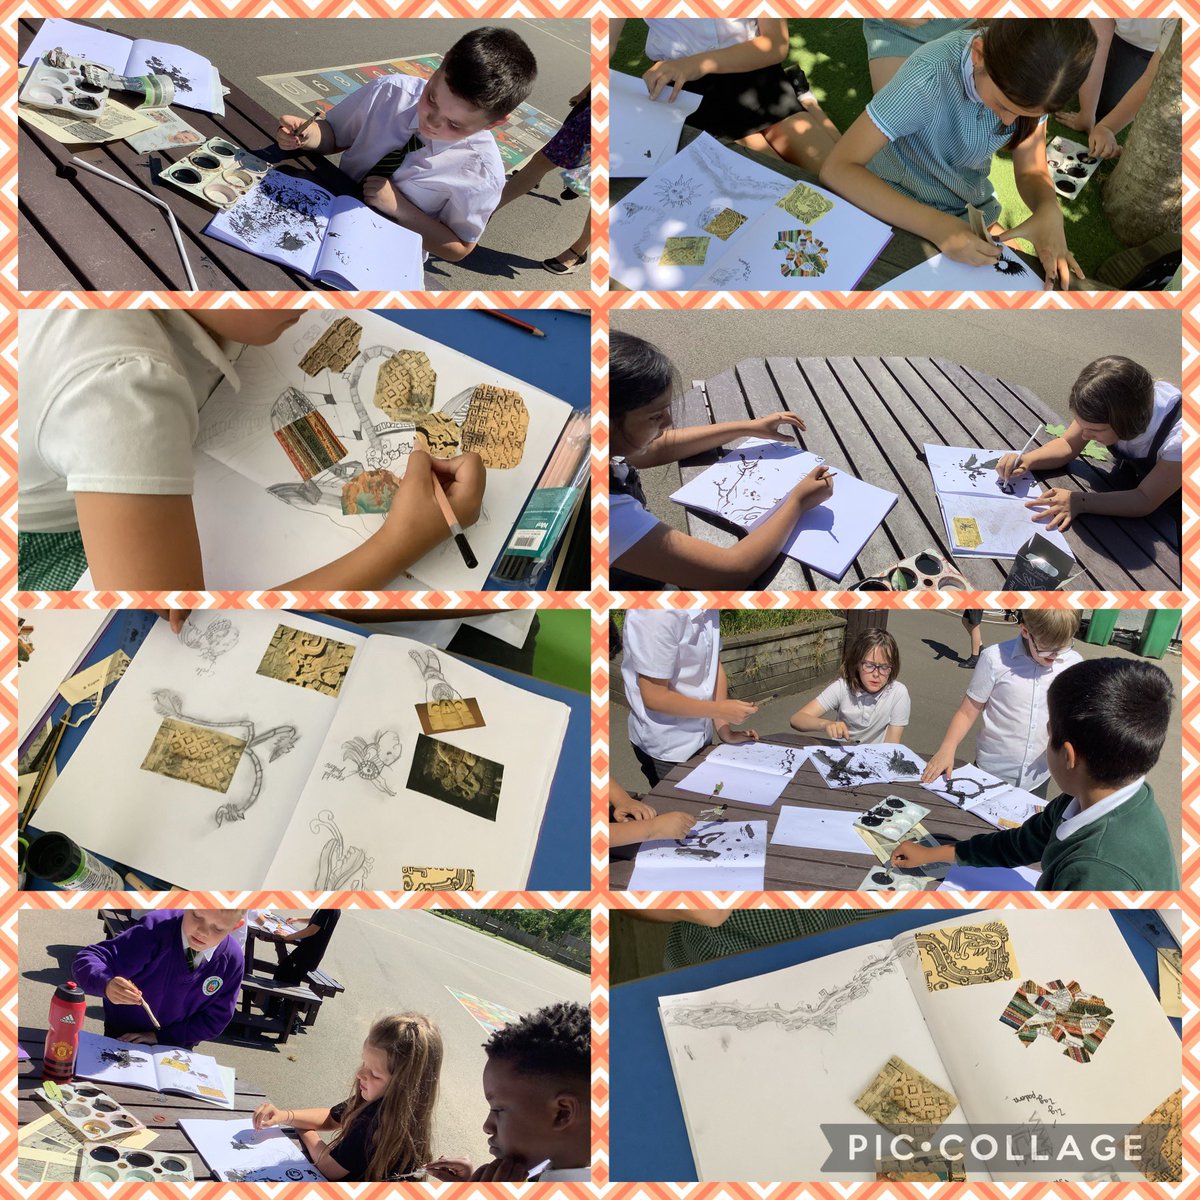 What a lovely afternoon we have had exploring Mayan artwork outside in the sun and experimenting with mark-making using found materials. @StJosephStBede @kapowprimary #sjsbArt #markmaking #inspiration